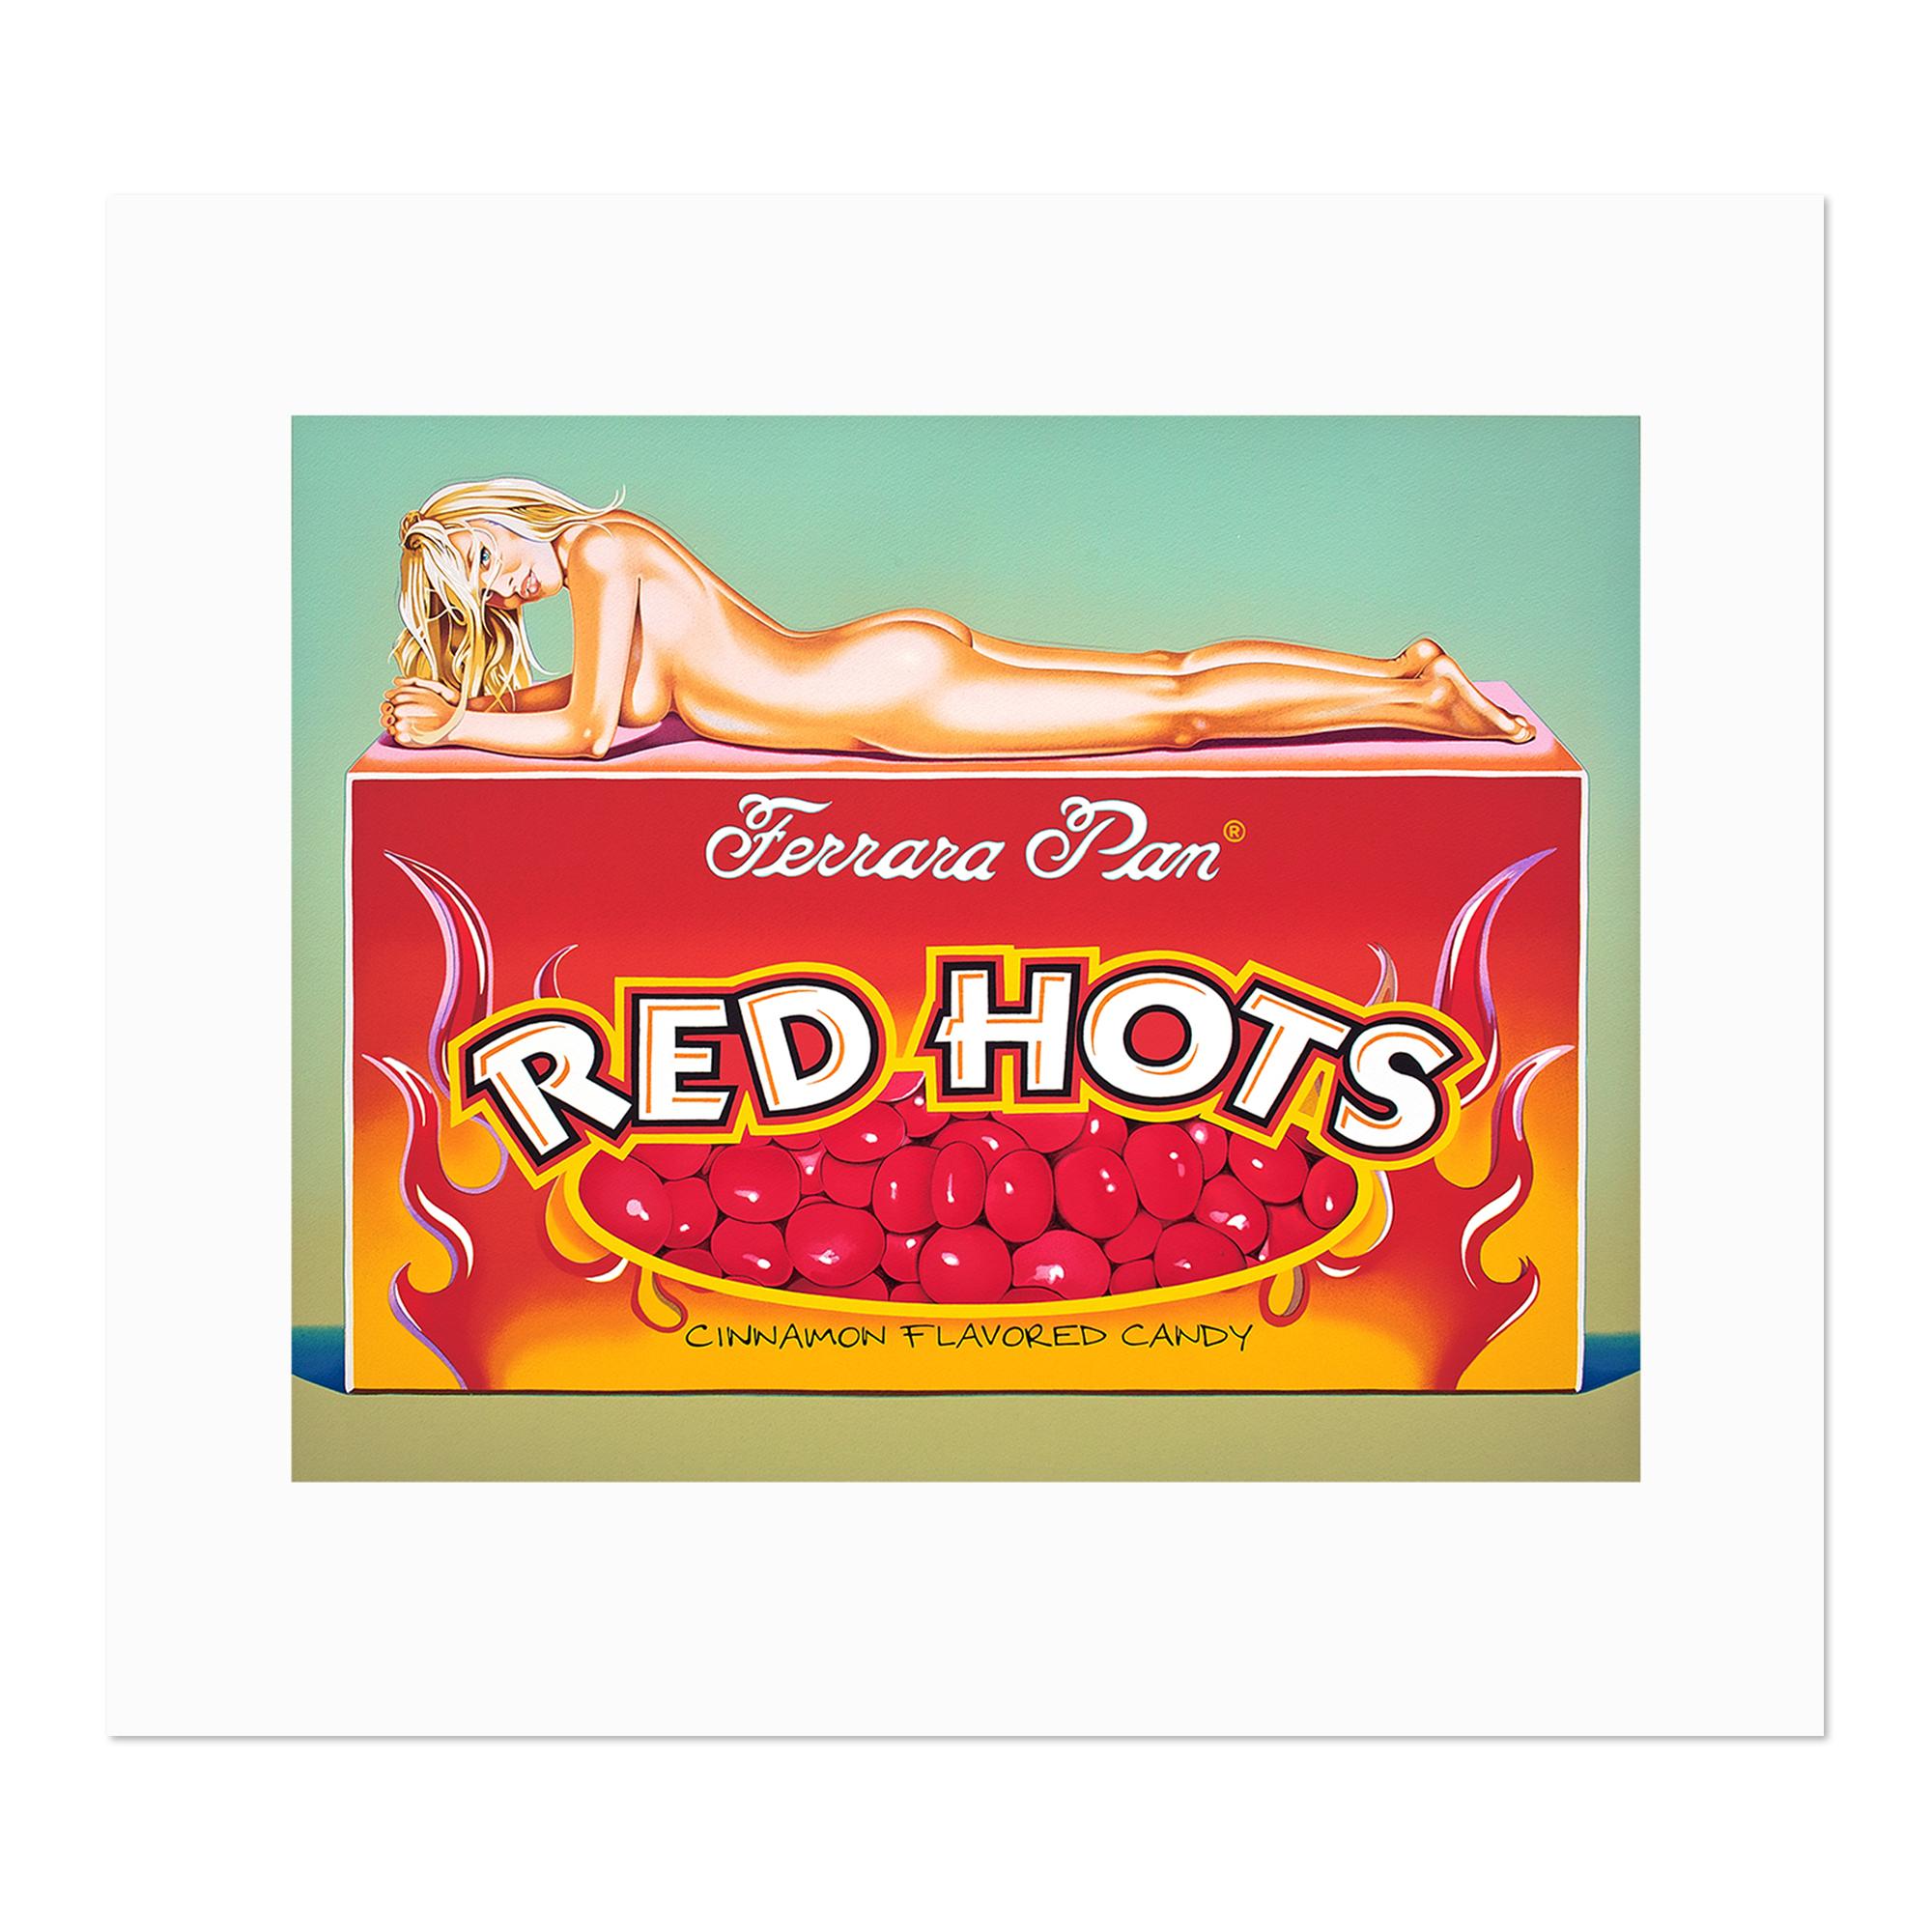 Mel Ramos (American, born 1935)
Red Hots, 2013
Medium: Lithograph in colors, on wove paper
Sheet dimensions: 88 x 100 cm
Image dimensions: 62 x 78 cm
Edition of 199: Hand signed and numbered
Condition: Excellent